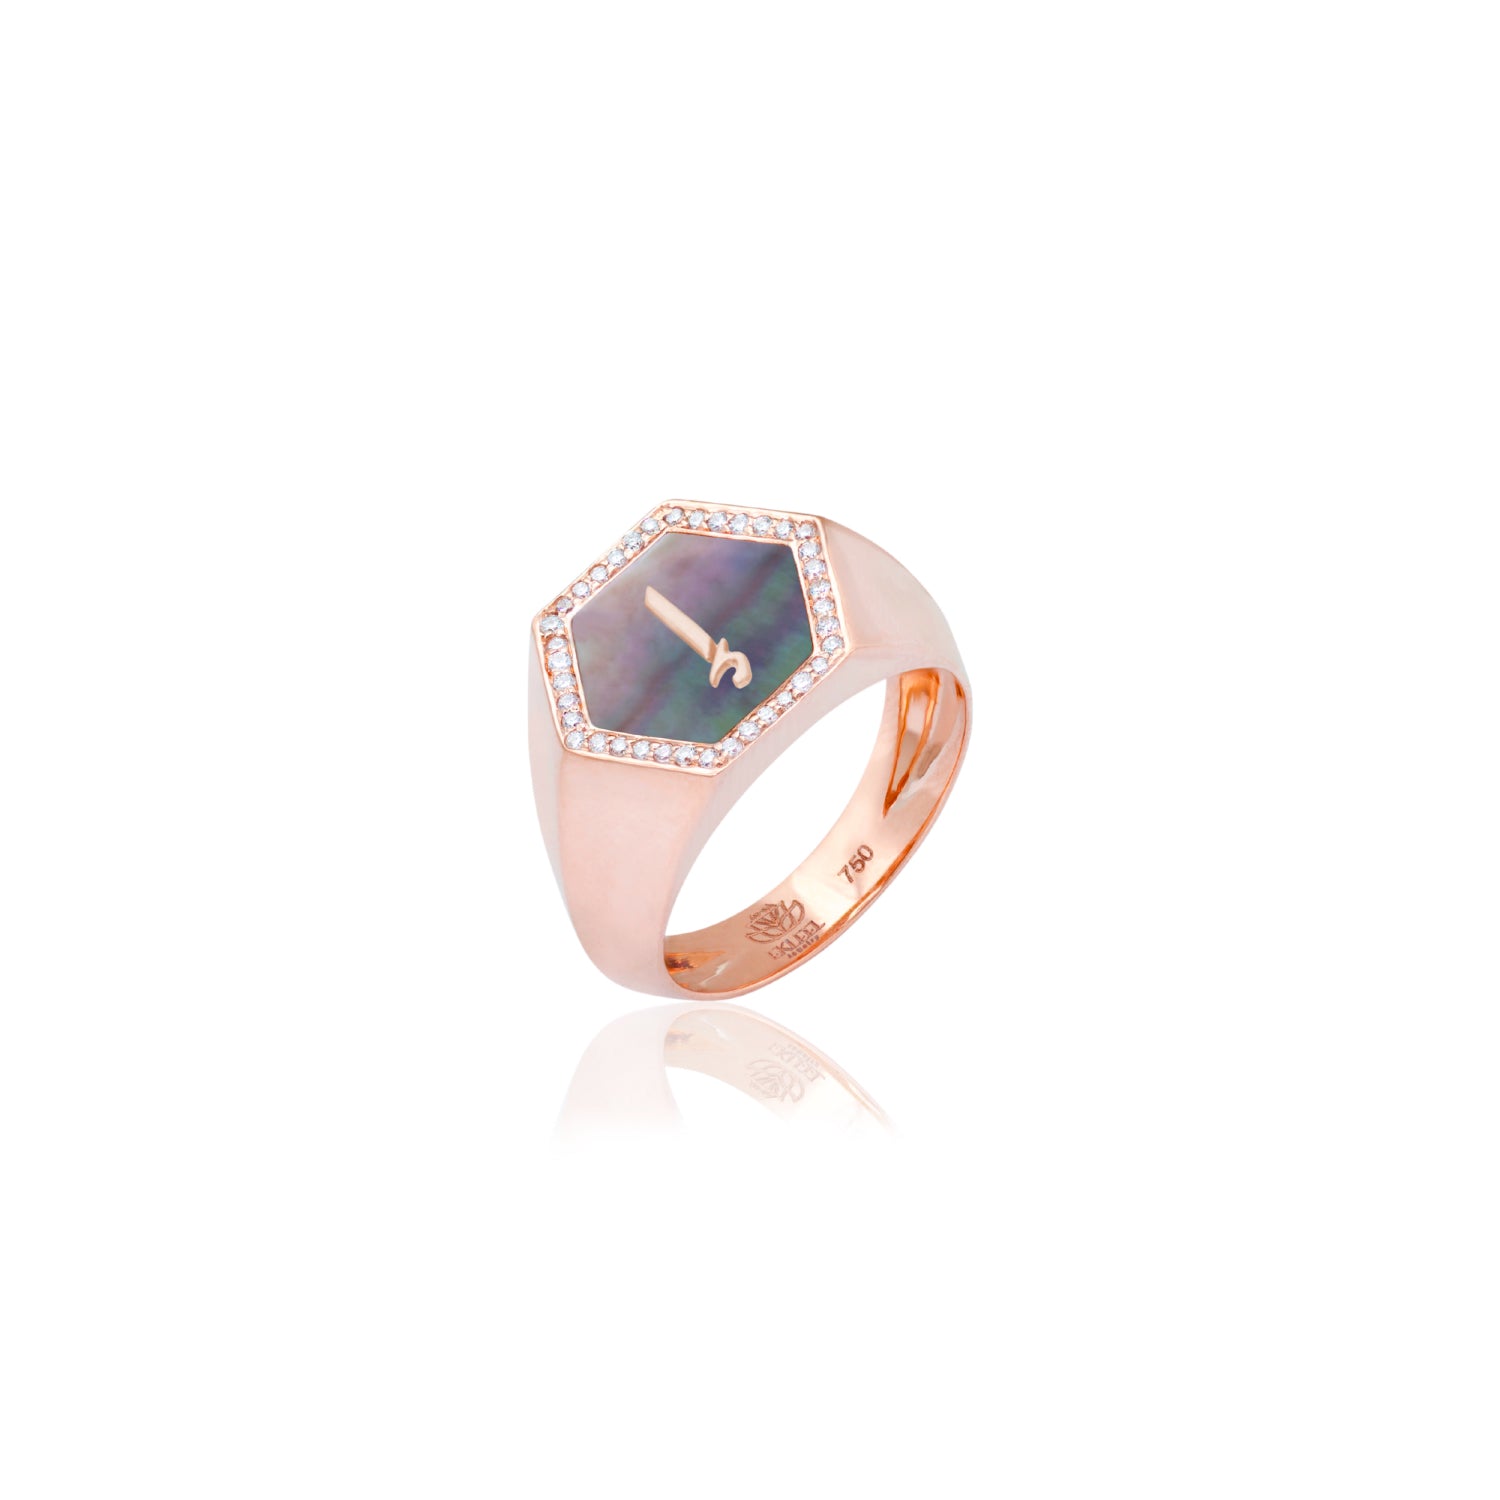 Qamoos 2.0 Letter إ Black Mother of Pearl and Diamond Signet Ring in Rose Gold